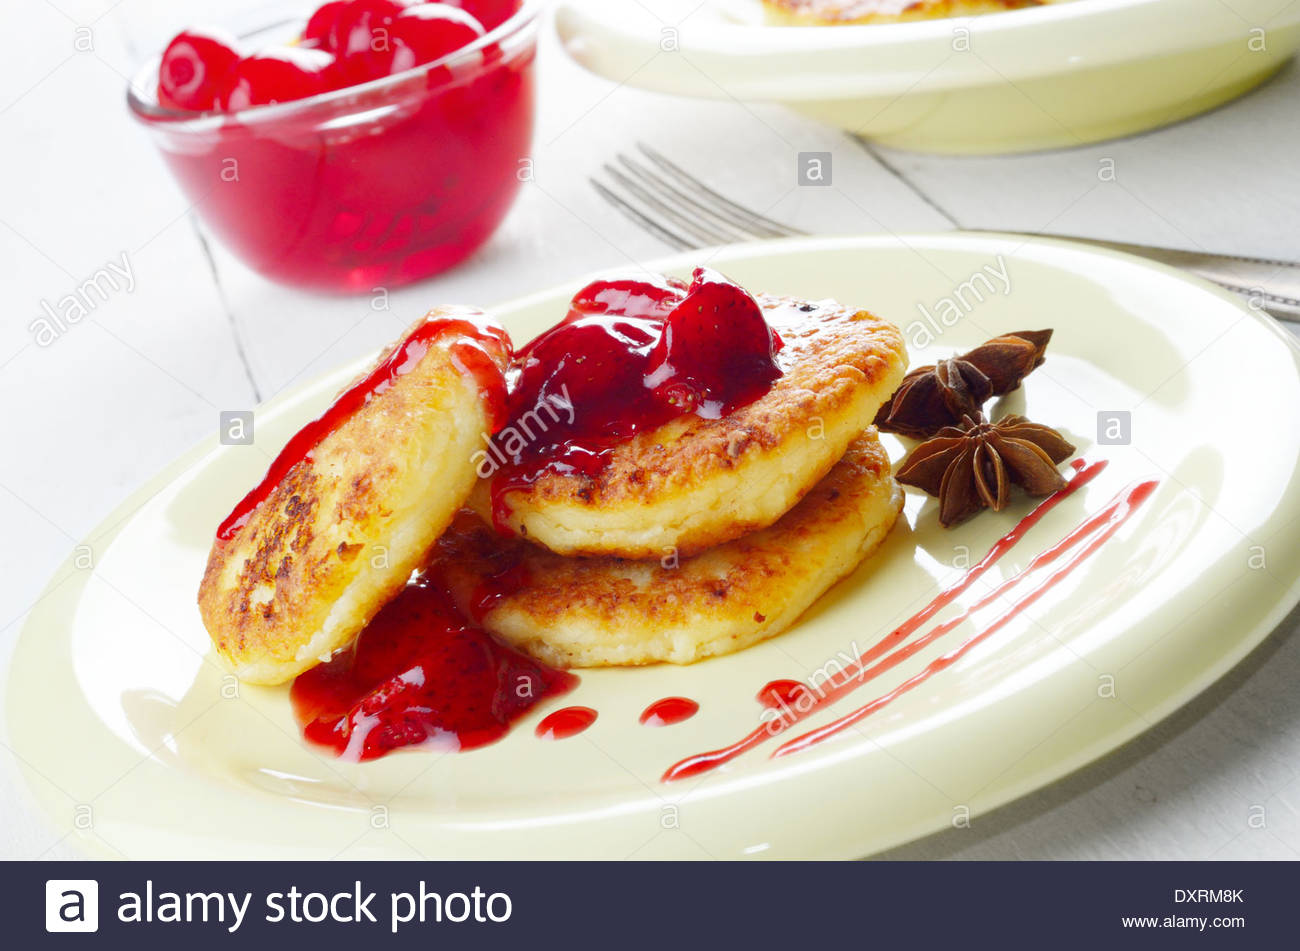 Pan Fried Cottage Cheese Patties With Strawberry Jam Stock Photo